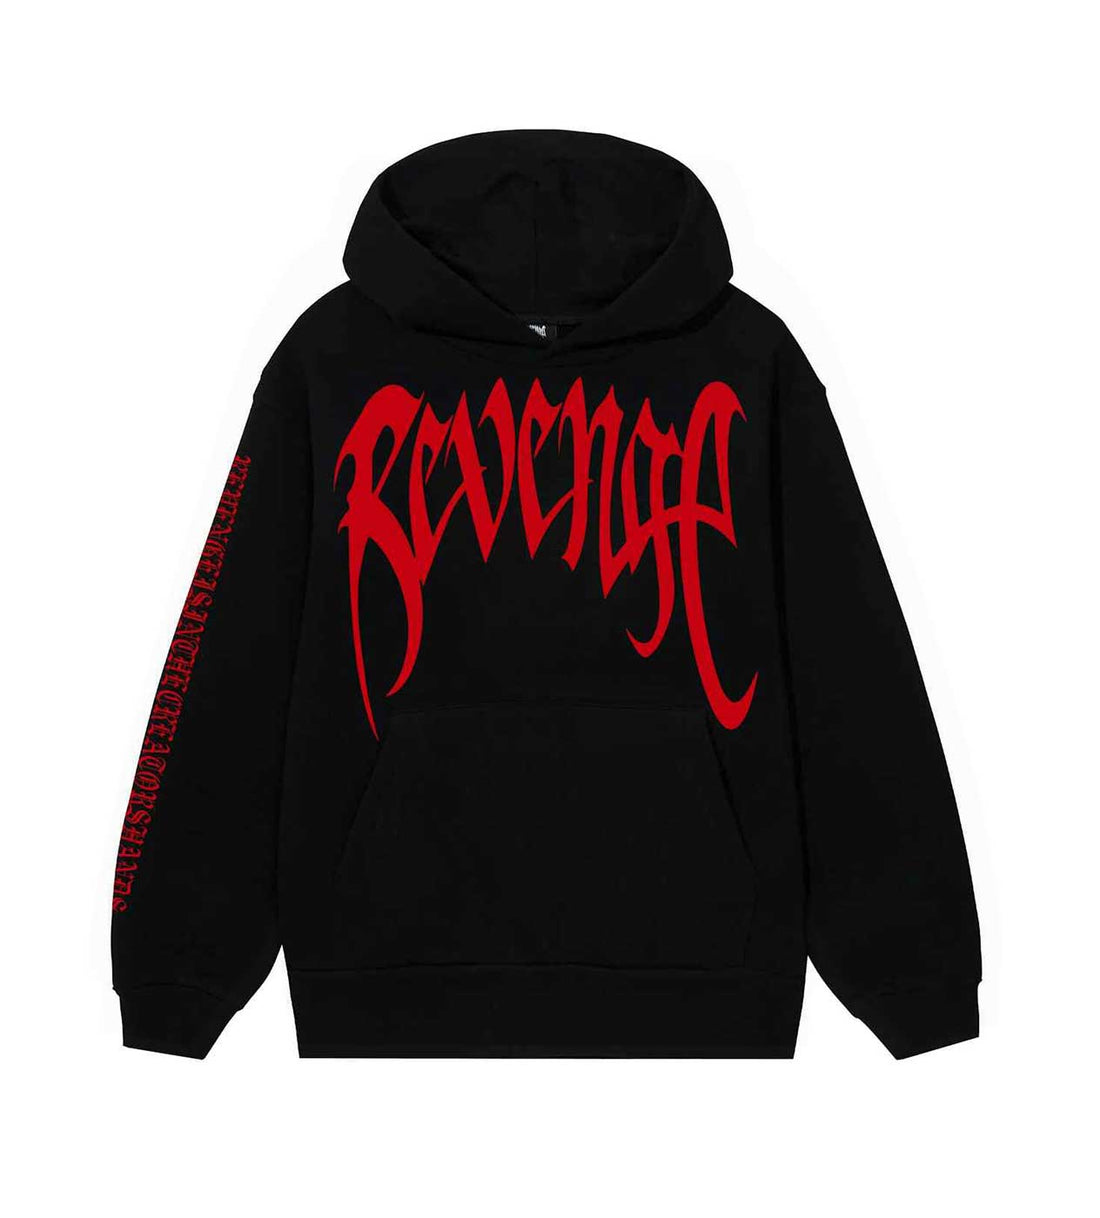 Revenge Archive Hoodie Black/Red Front